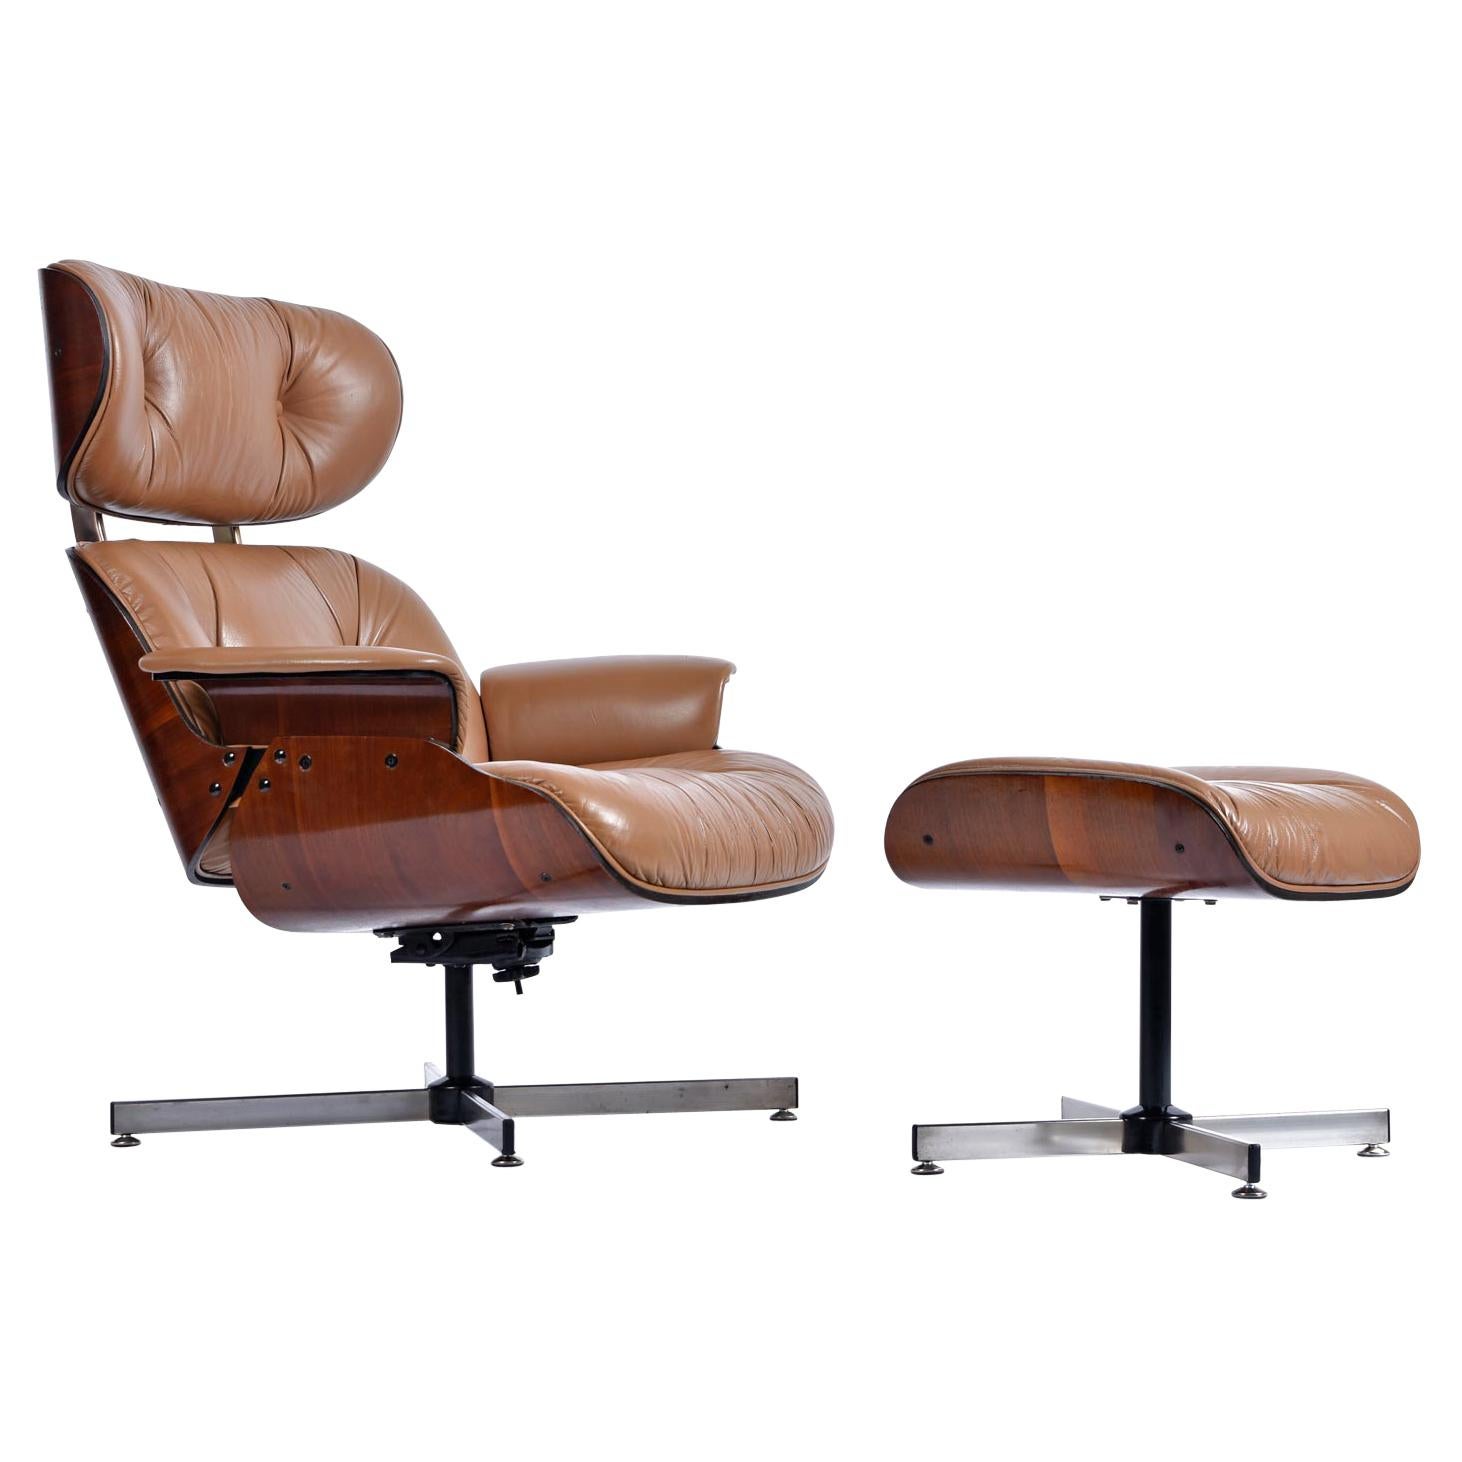 Plycraft Lounge Chair and Ottoman in Walnut